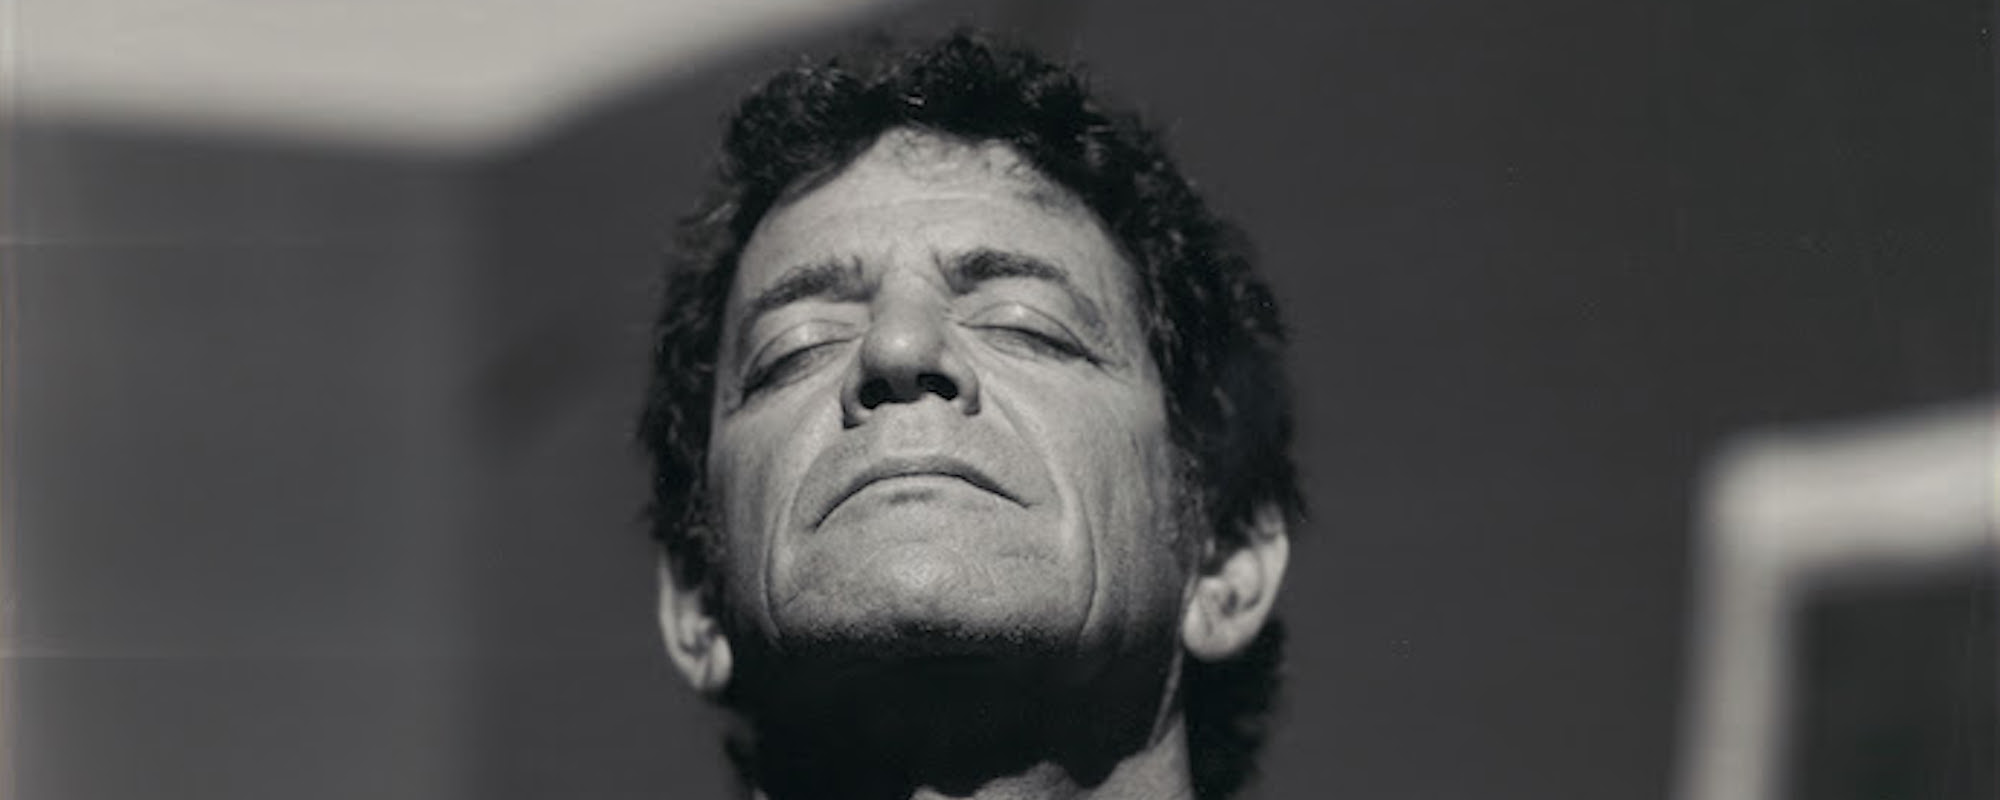 Lou Reed’s Earliest Known 1965 Demo of “Heroin” Released